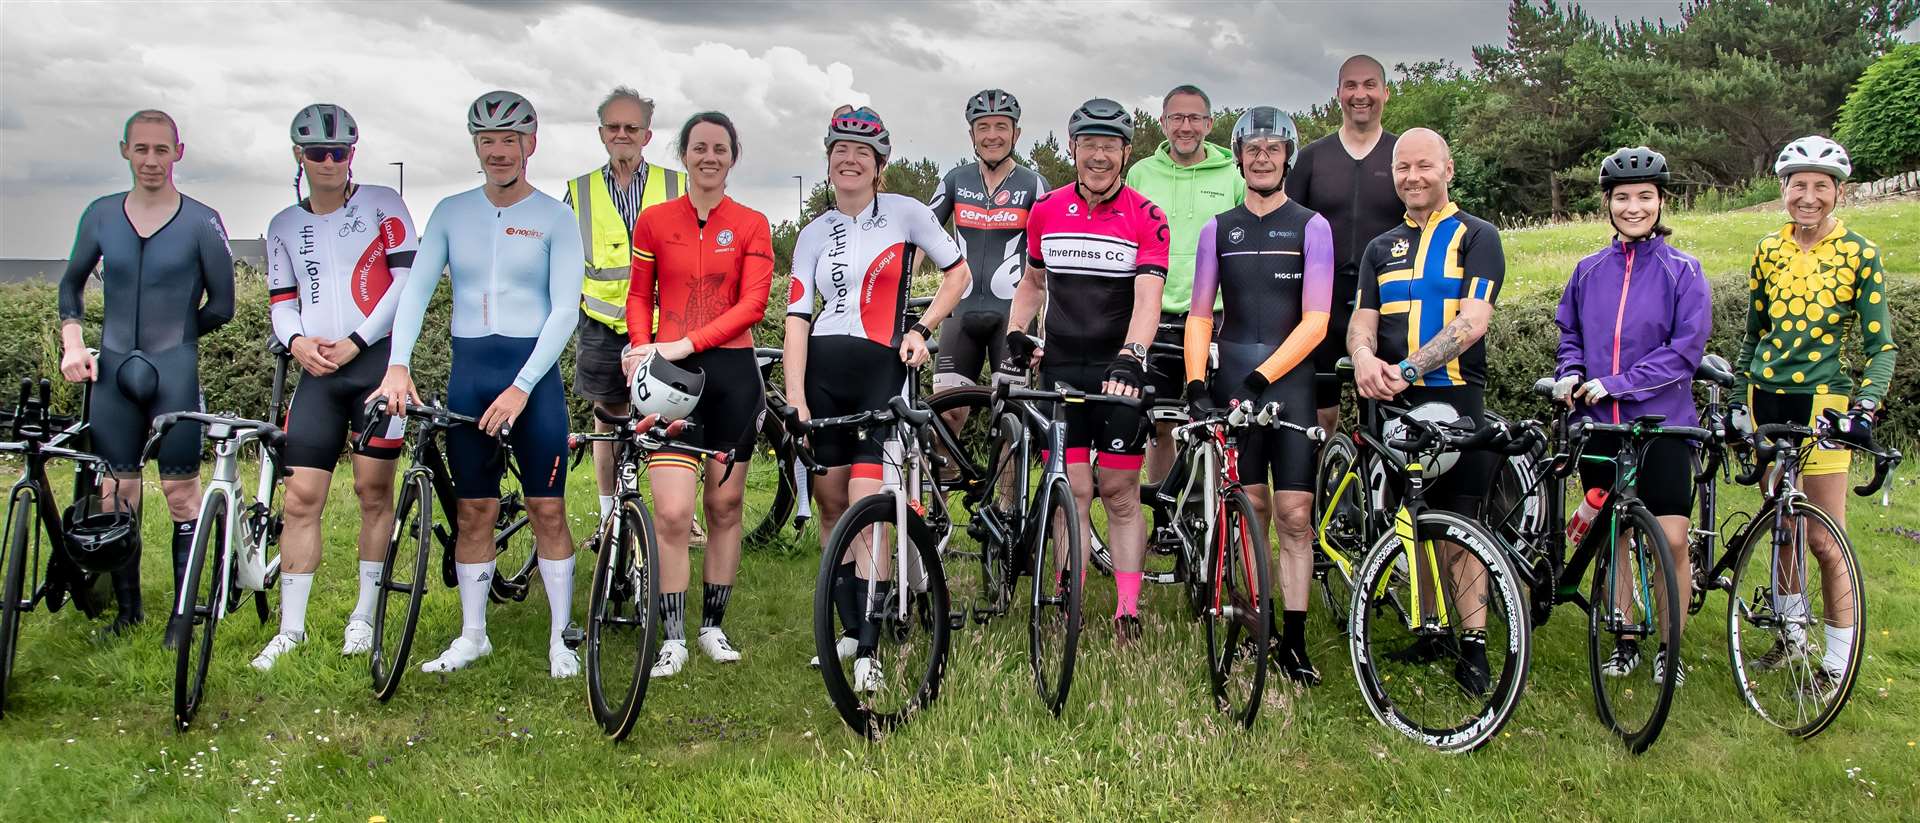 Competitors in Caithness Cycling Club’s recent Festival of Cycling, supported by Sinclair Bay Subsea, which attracted riders from Orkney and Glasgow as well as from the Highlands. Picture: Malcolm Gray